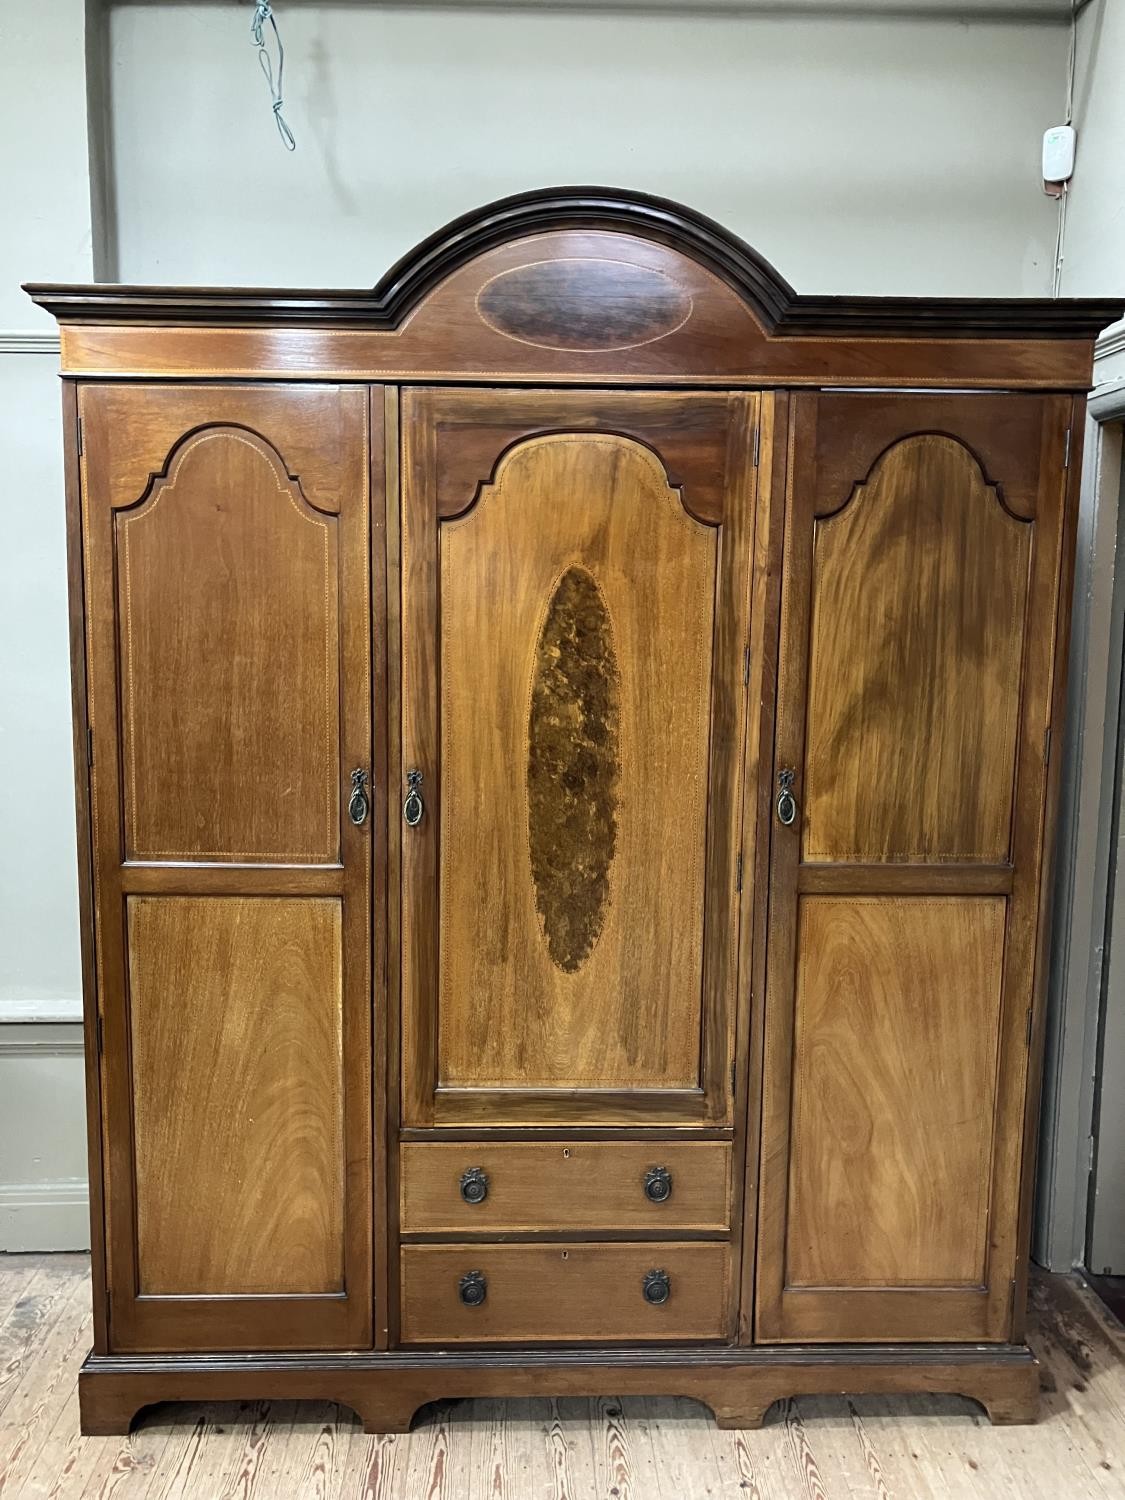 An Edwardian three door wardrobe of semi arched profile with moulded cornice, the middle door having